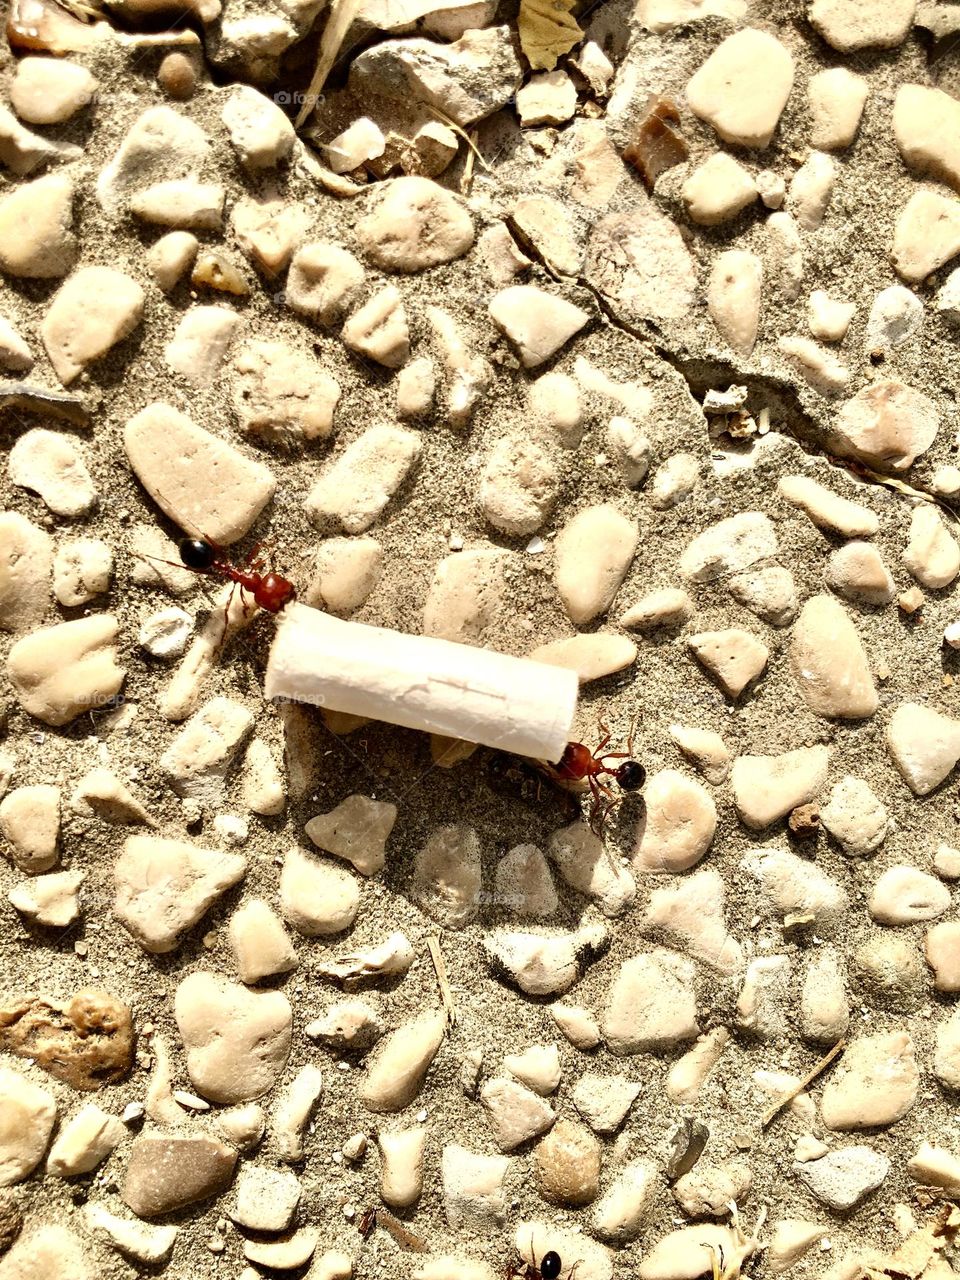 Ants in a cigarette filter